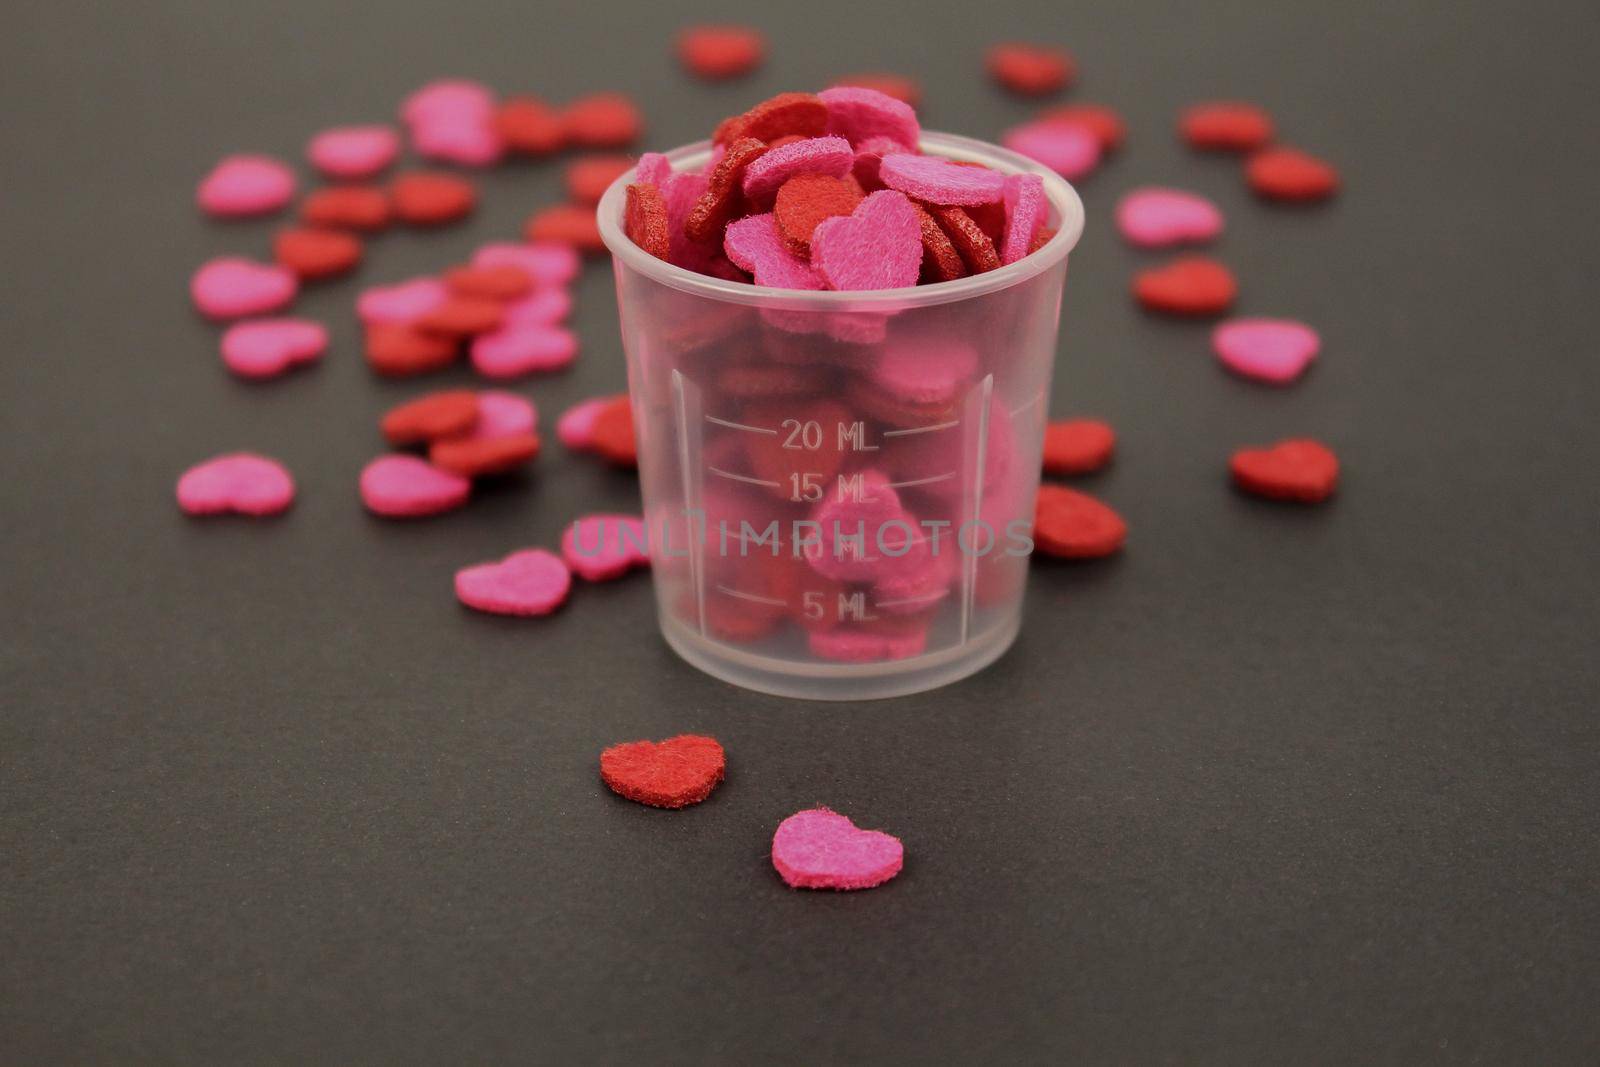 Red Pink Heart Candy in Transparent Cup Dark Background Love Valentine Concept by JuliaDorian